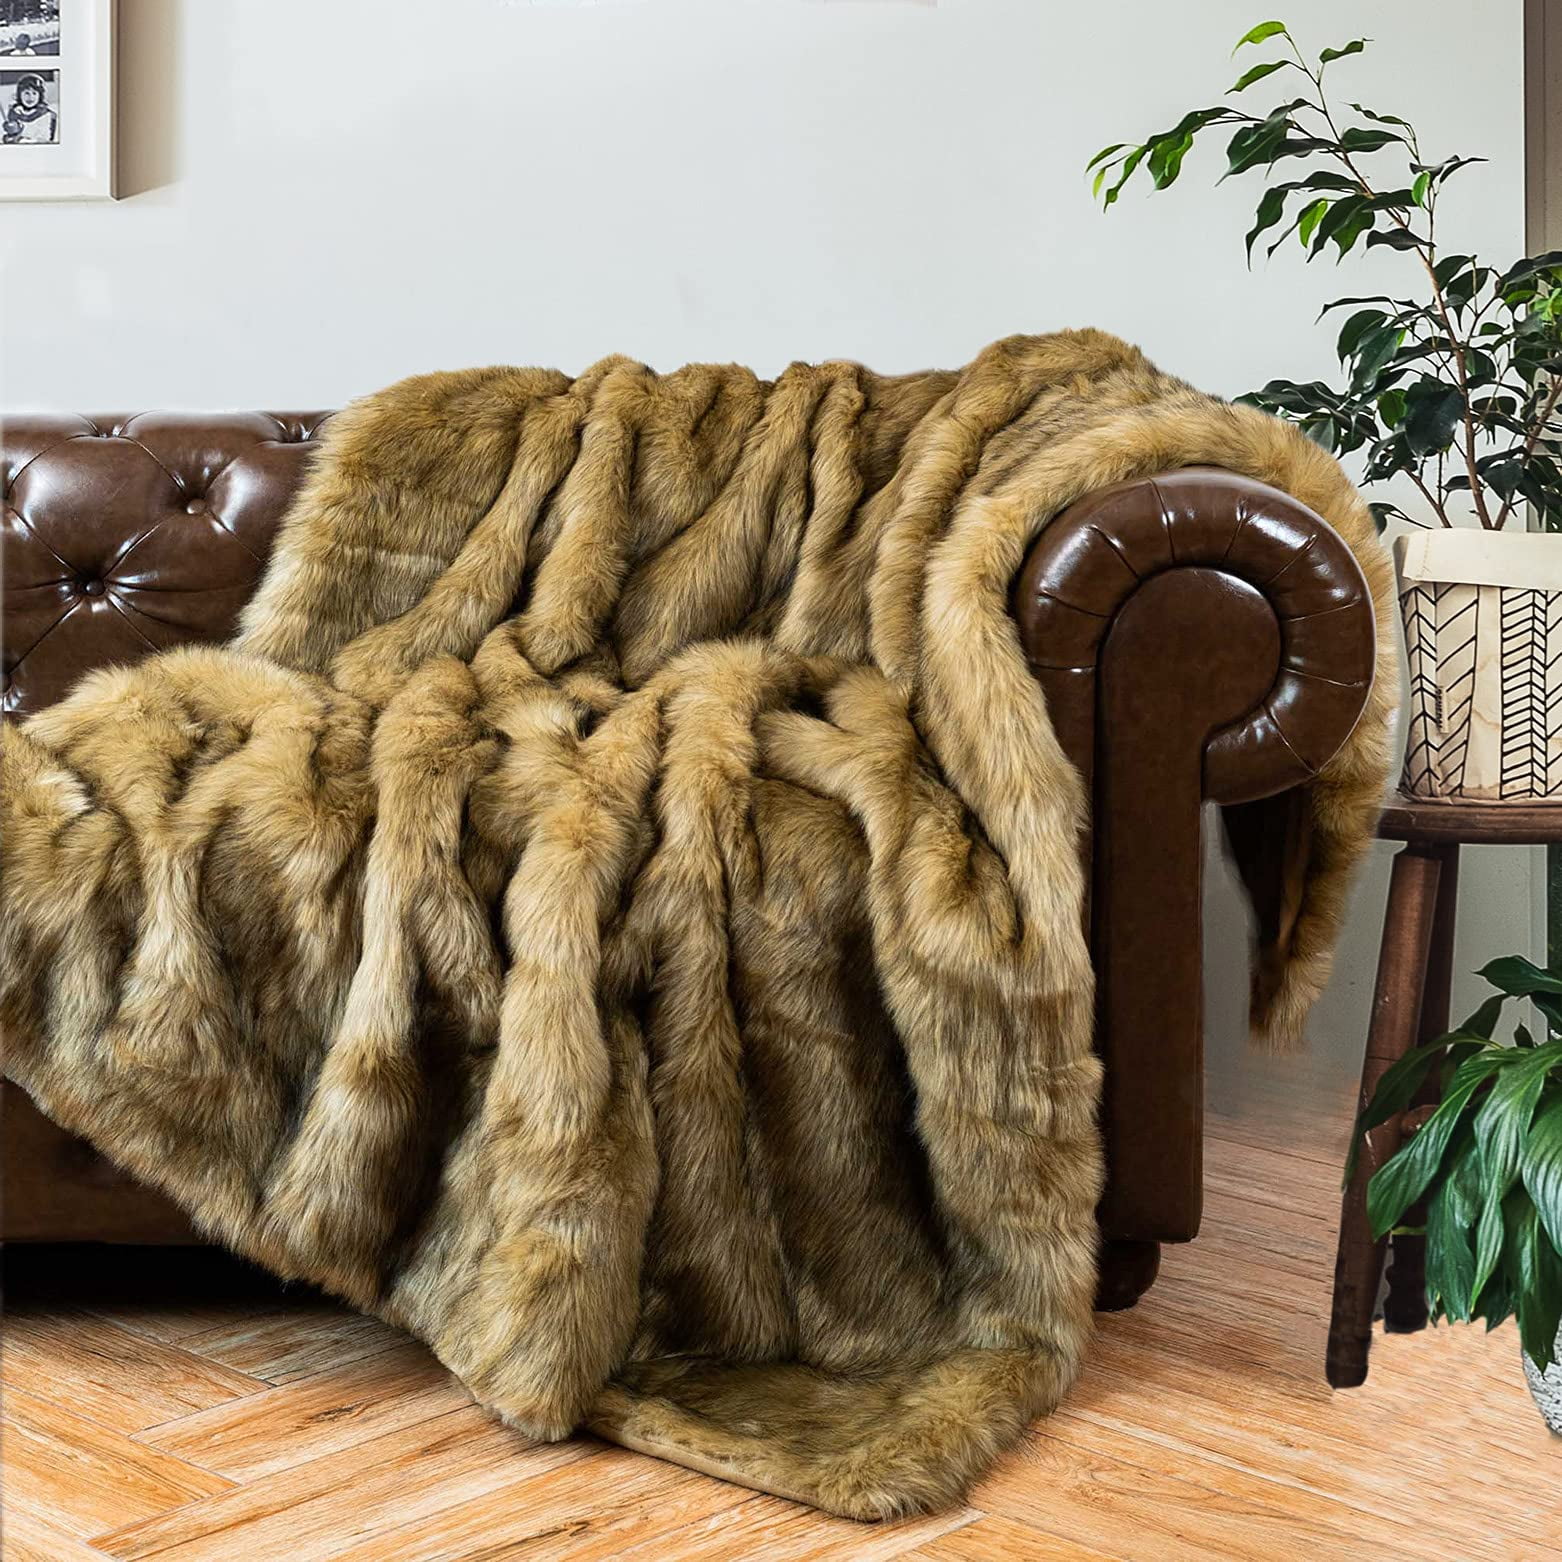 Battilo Luxury Camel Faux Fur Throw Blanket, Soft Cozy Warm Mink Faux Fur  Blanket for Bed, Home Decor, Large Faux Fur Blankets and Throws, 60x80